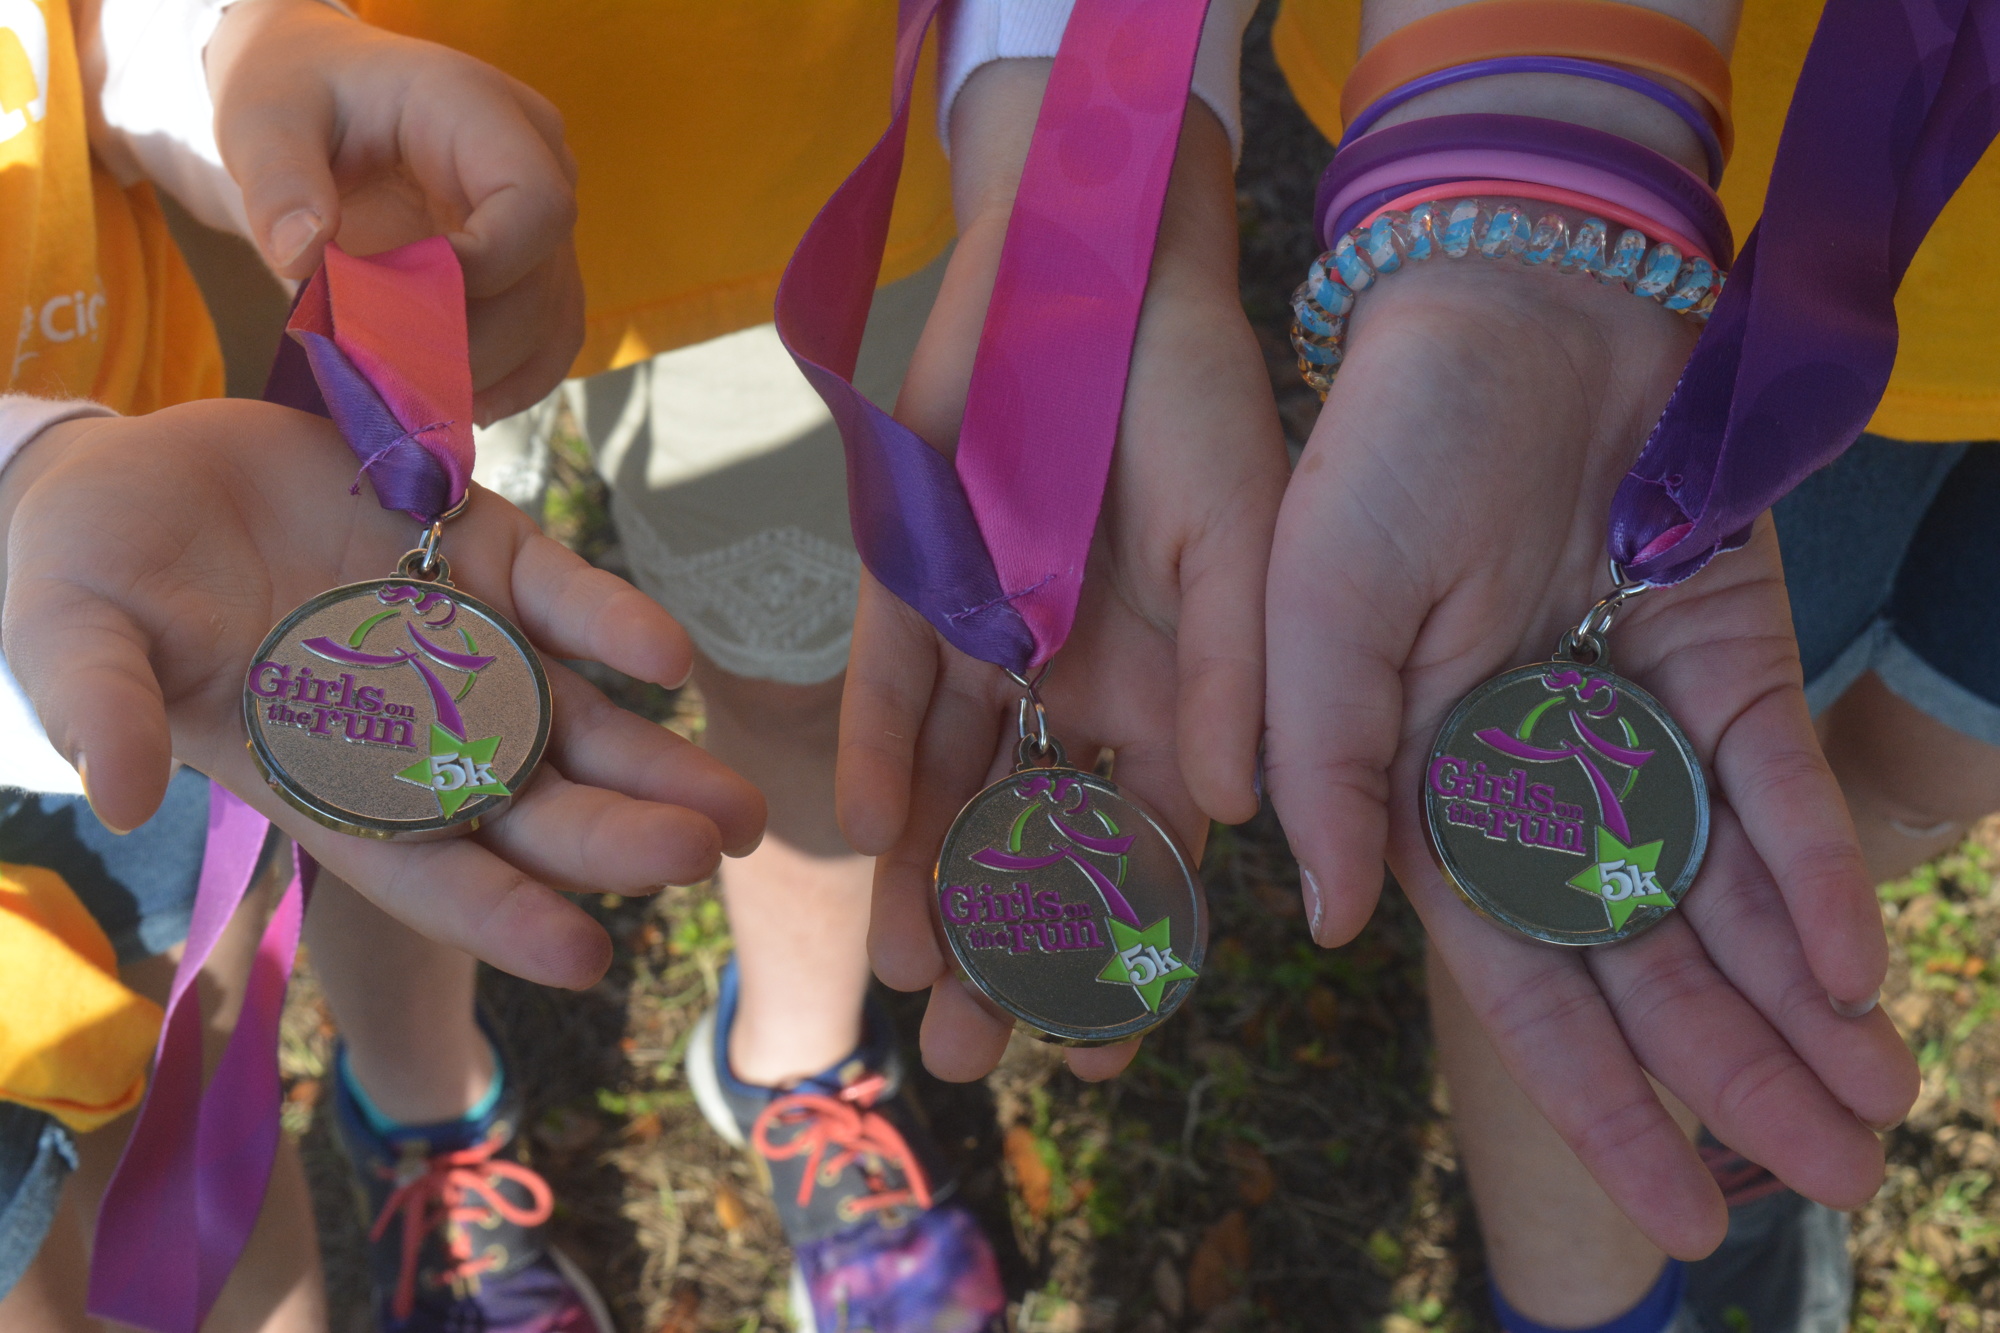 Medals awarded to the participants of the Girls on the Run 5K presented by UnitedHealthcare.